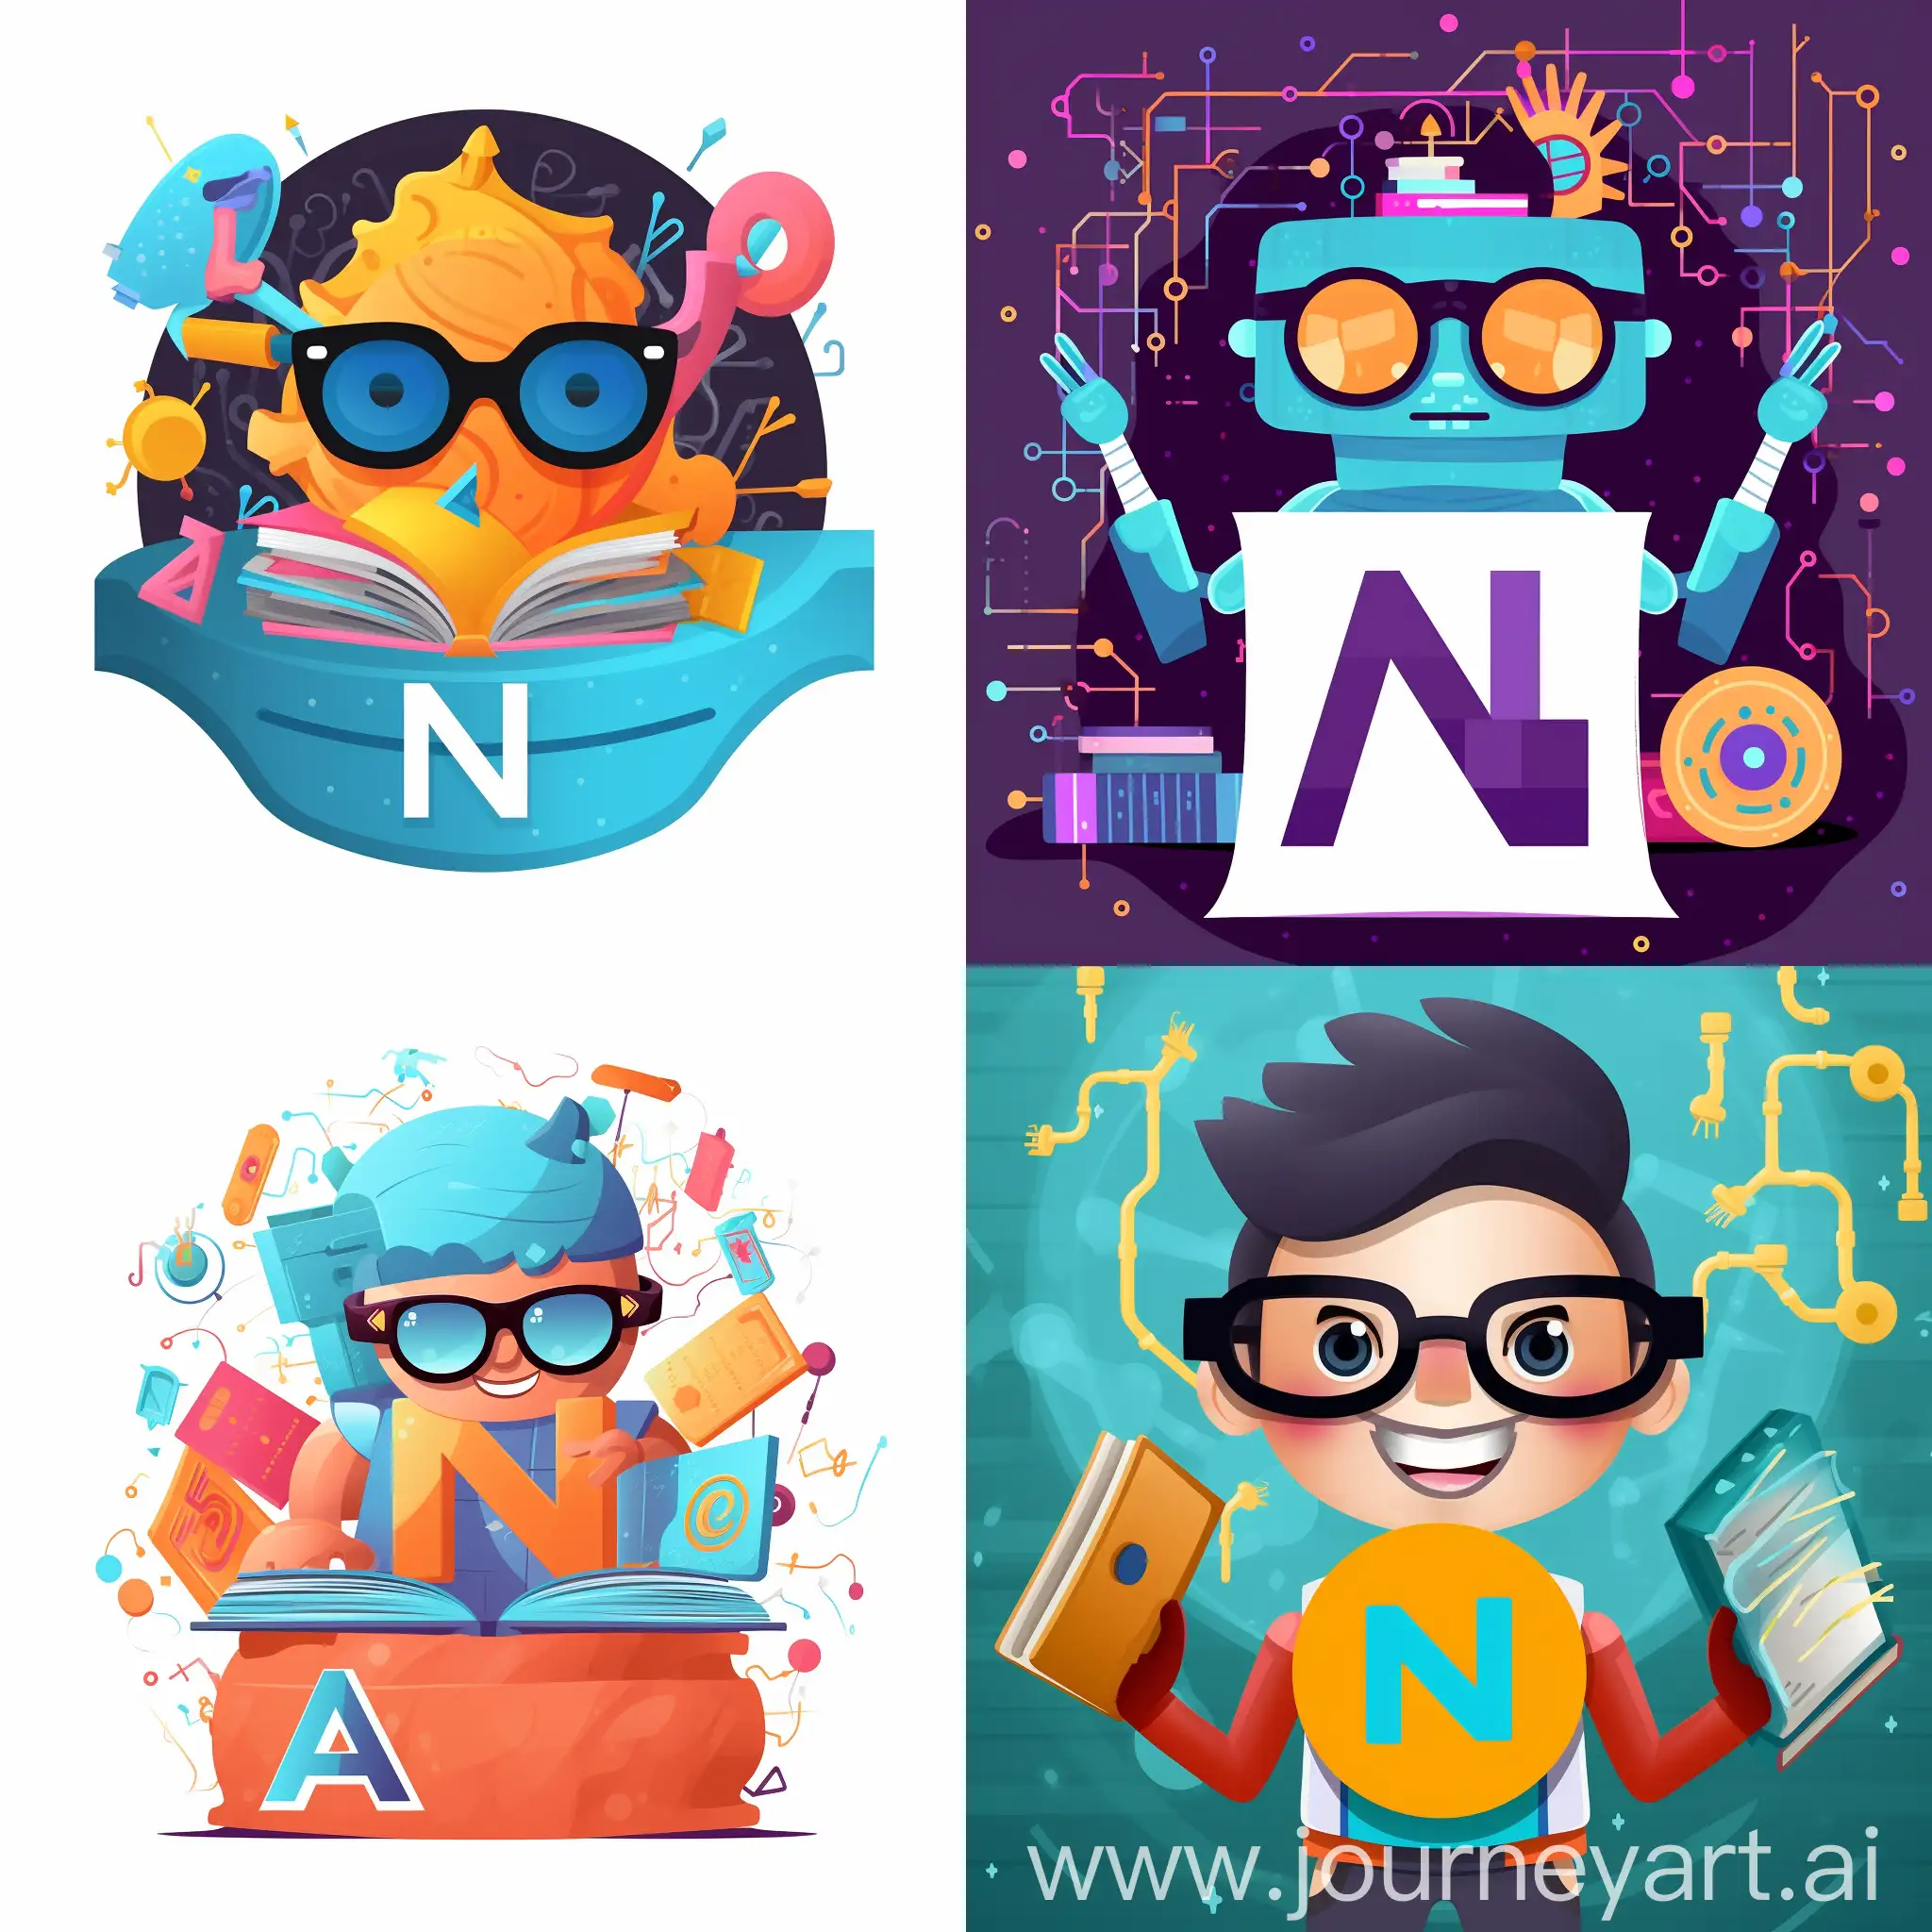 An AI e-learning platform logo featuring a friendly robot mascot named N+AI, with N+AI wearing glasses and holding a book, surrounded by digital elements like binary code and gears, set against a backdrop of a stylized circuit board, Artwork, digital illustration with vibrant colors and detailed textures, --ar 1:1 --v 5
